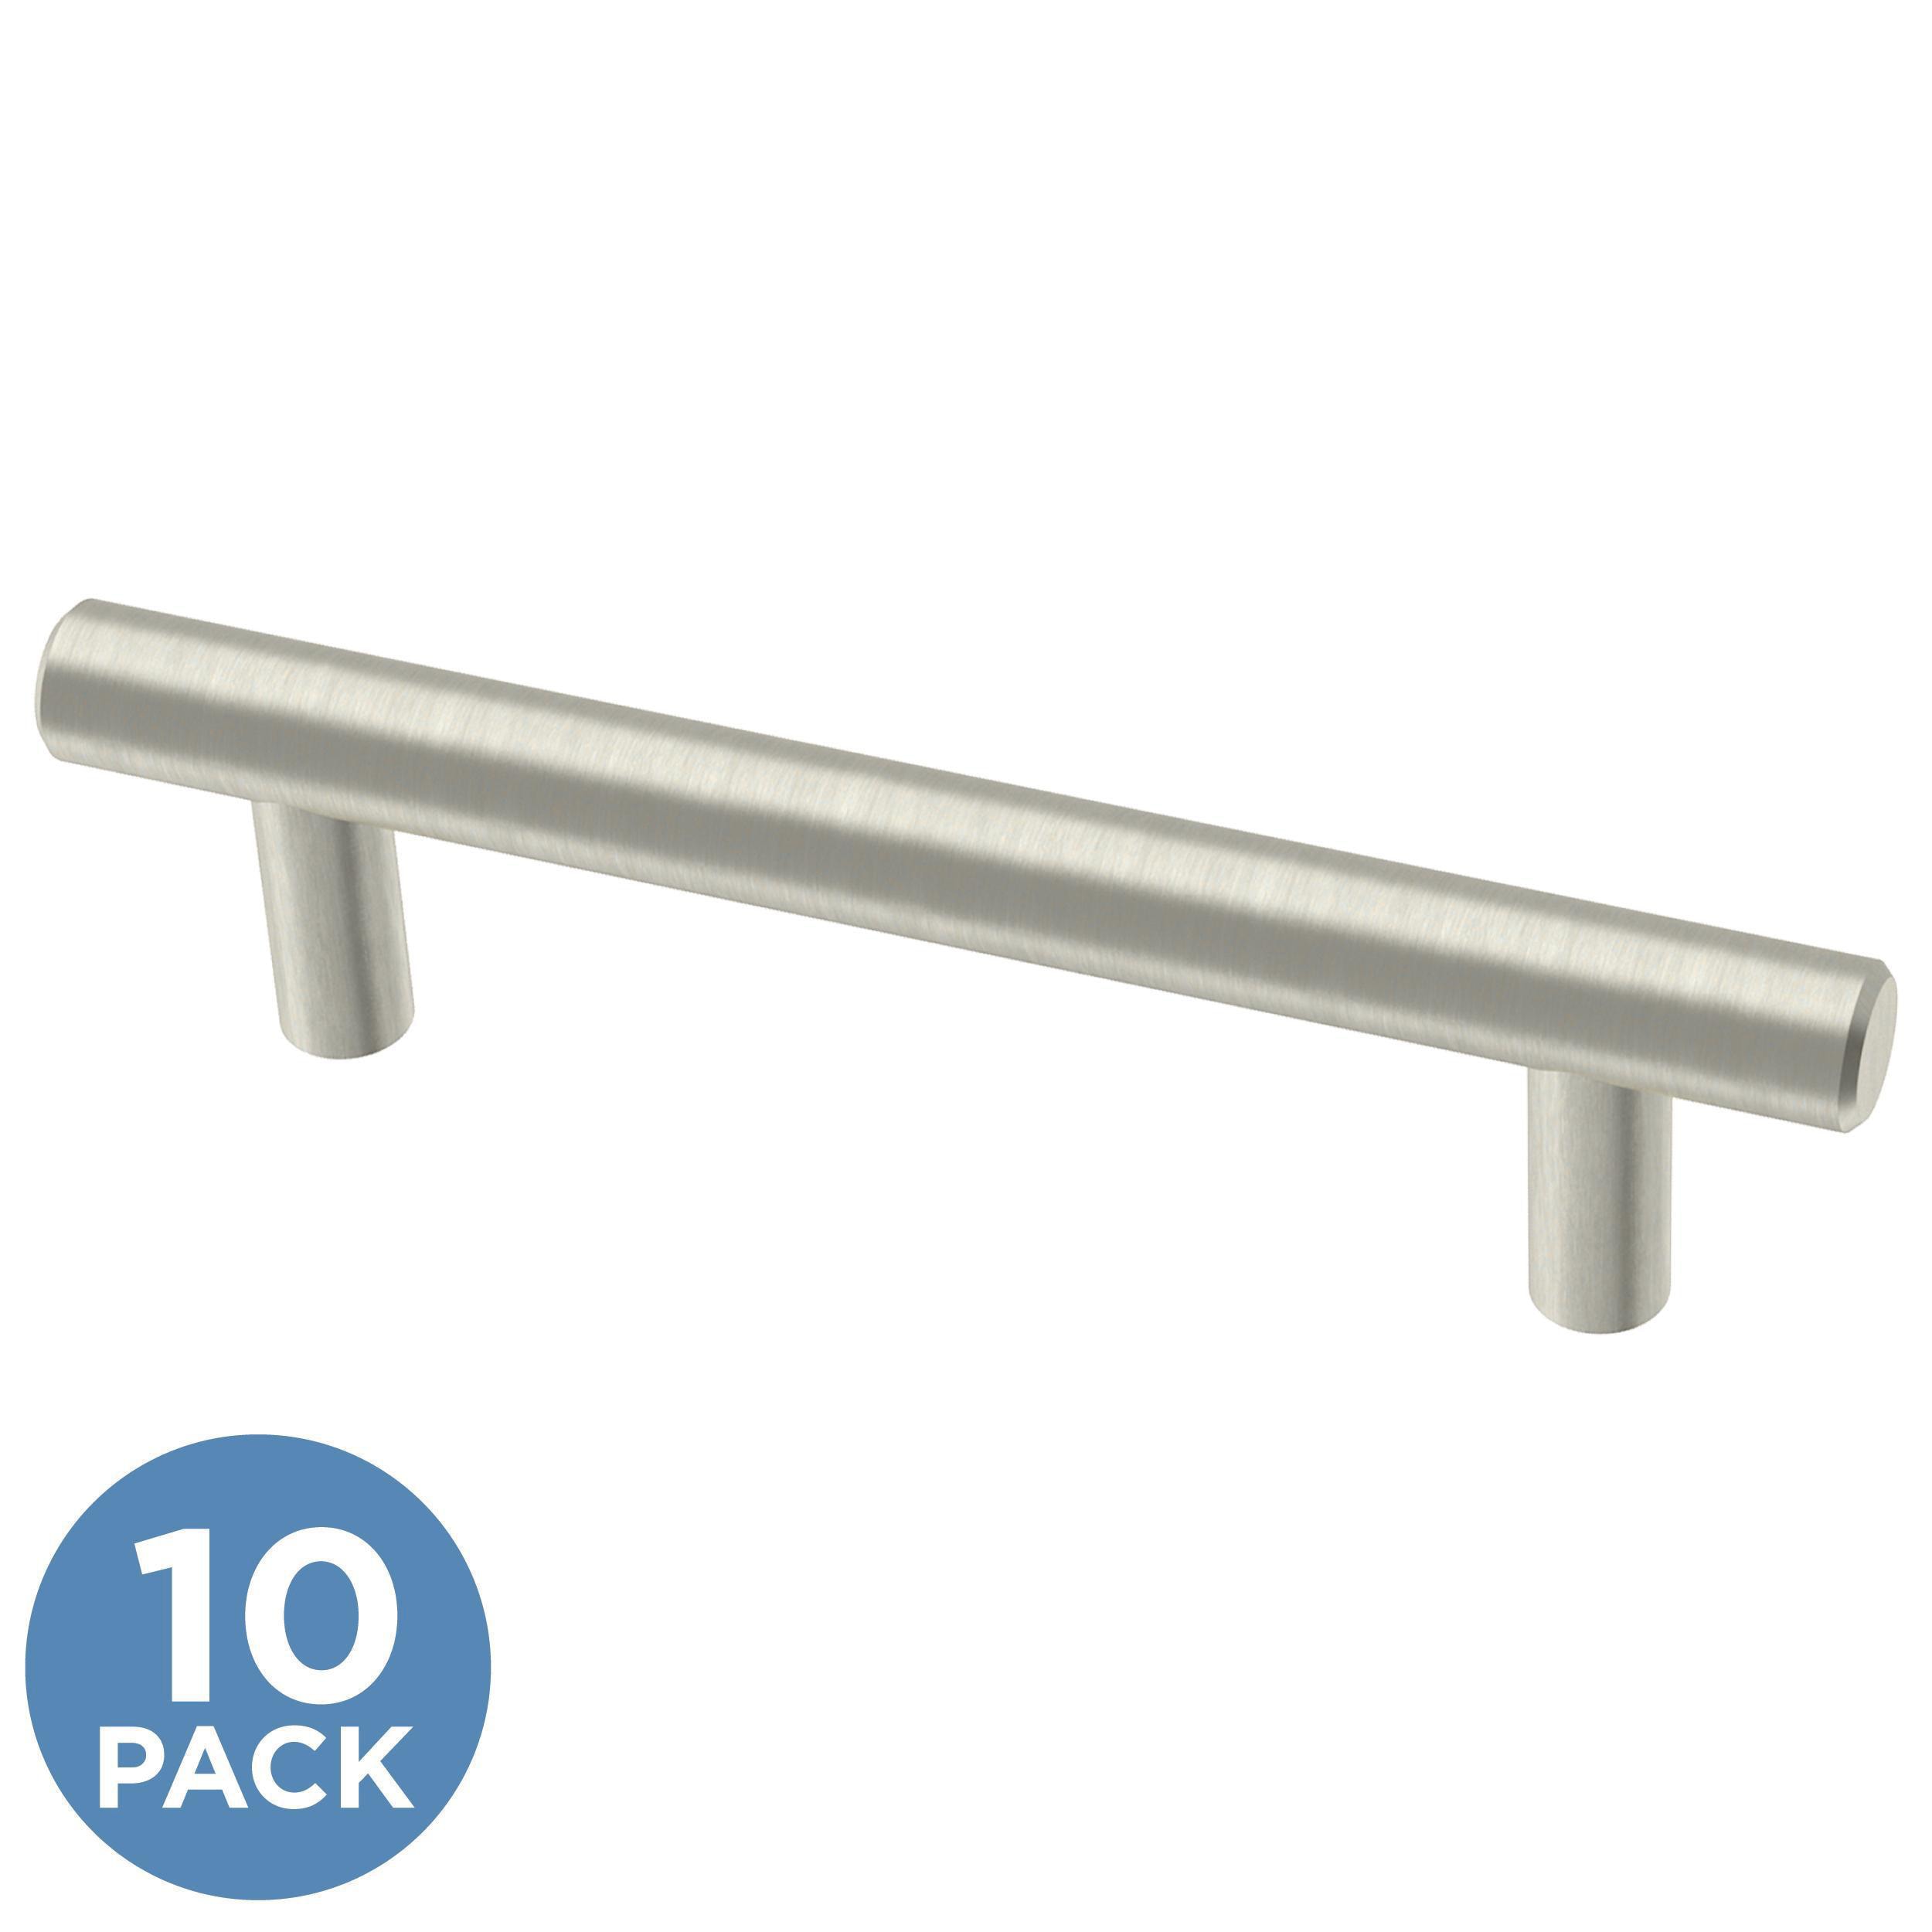 10PACK Brushed Brass Cabinet Pulls and Knobs 3 3/4 inch Hole Centers Square  T Bar Dresser Cupboard Bathroom Door Pull 6 Length Gold Drawer Pull